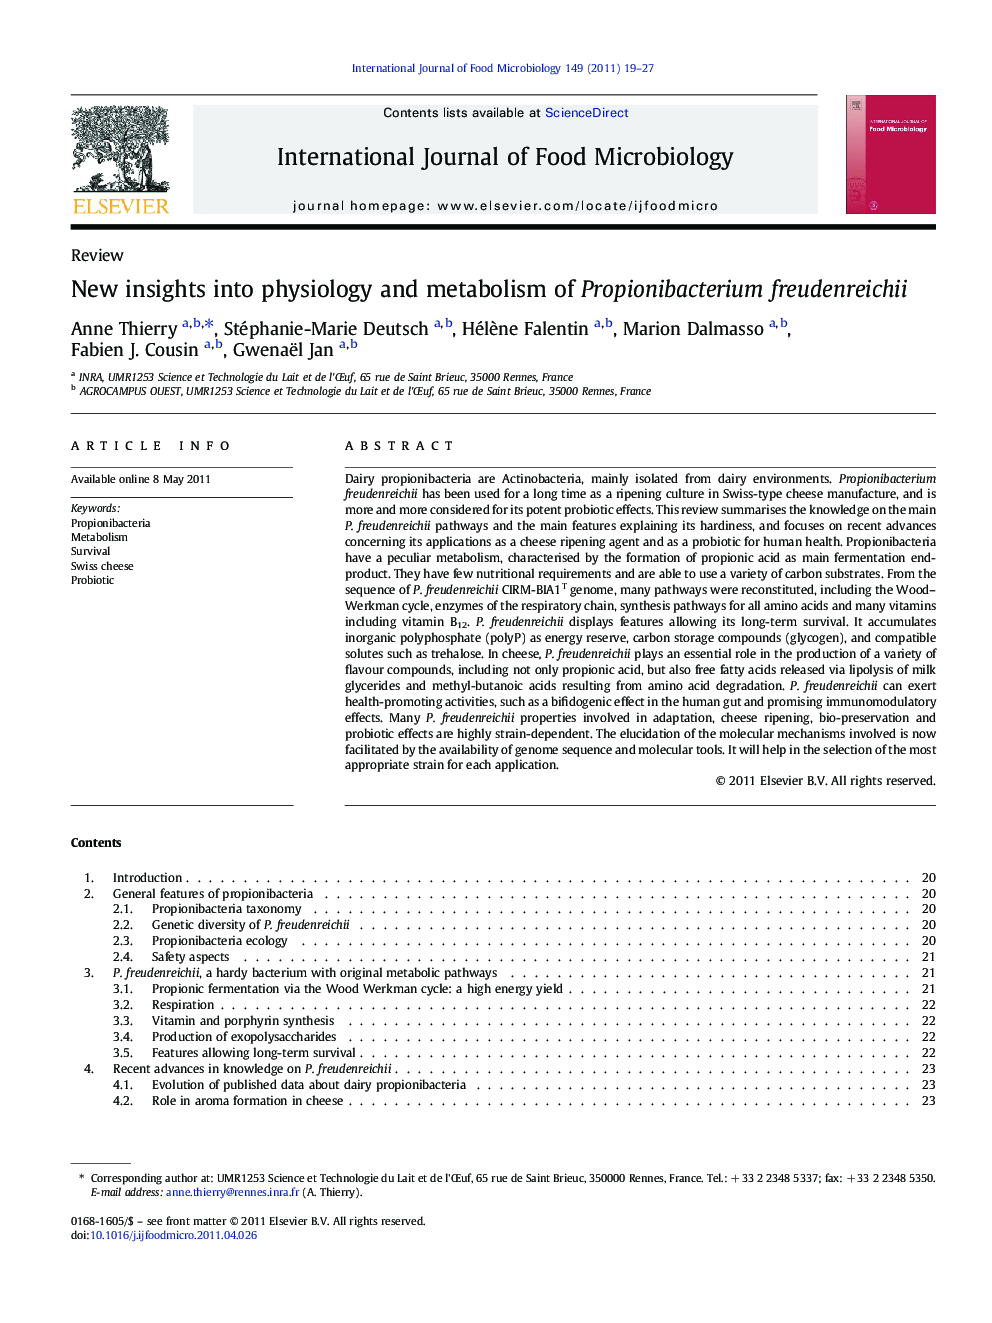 New insights into physiology and metabolism of Propionibacterium freudenreichii